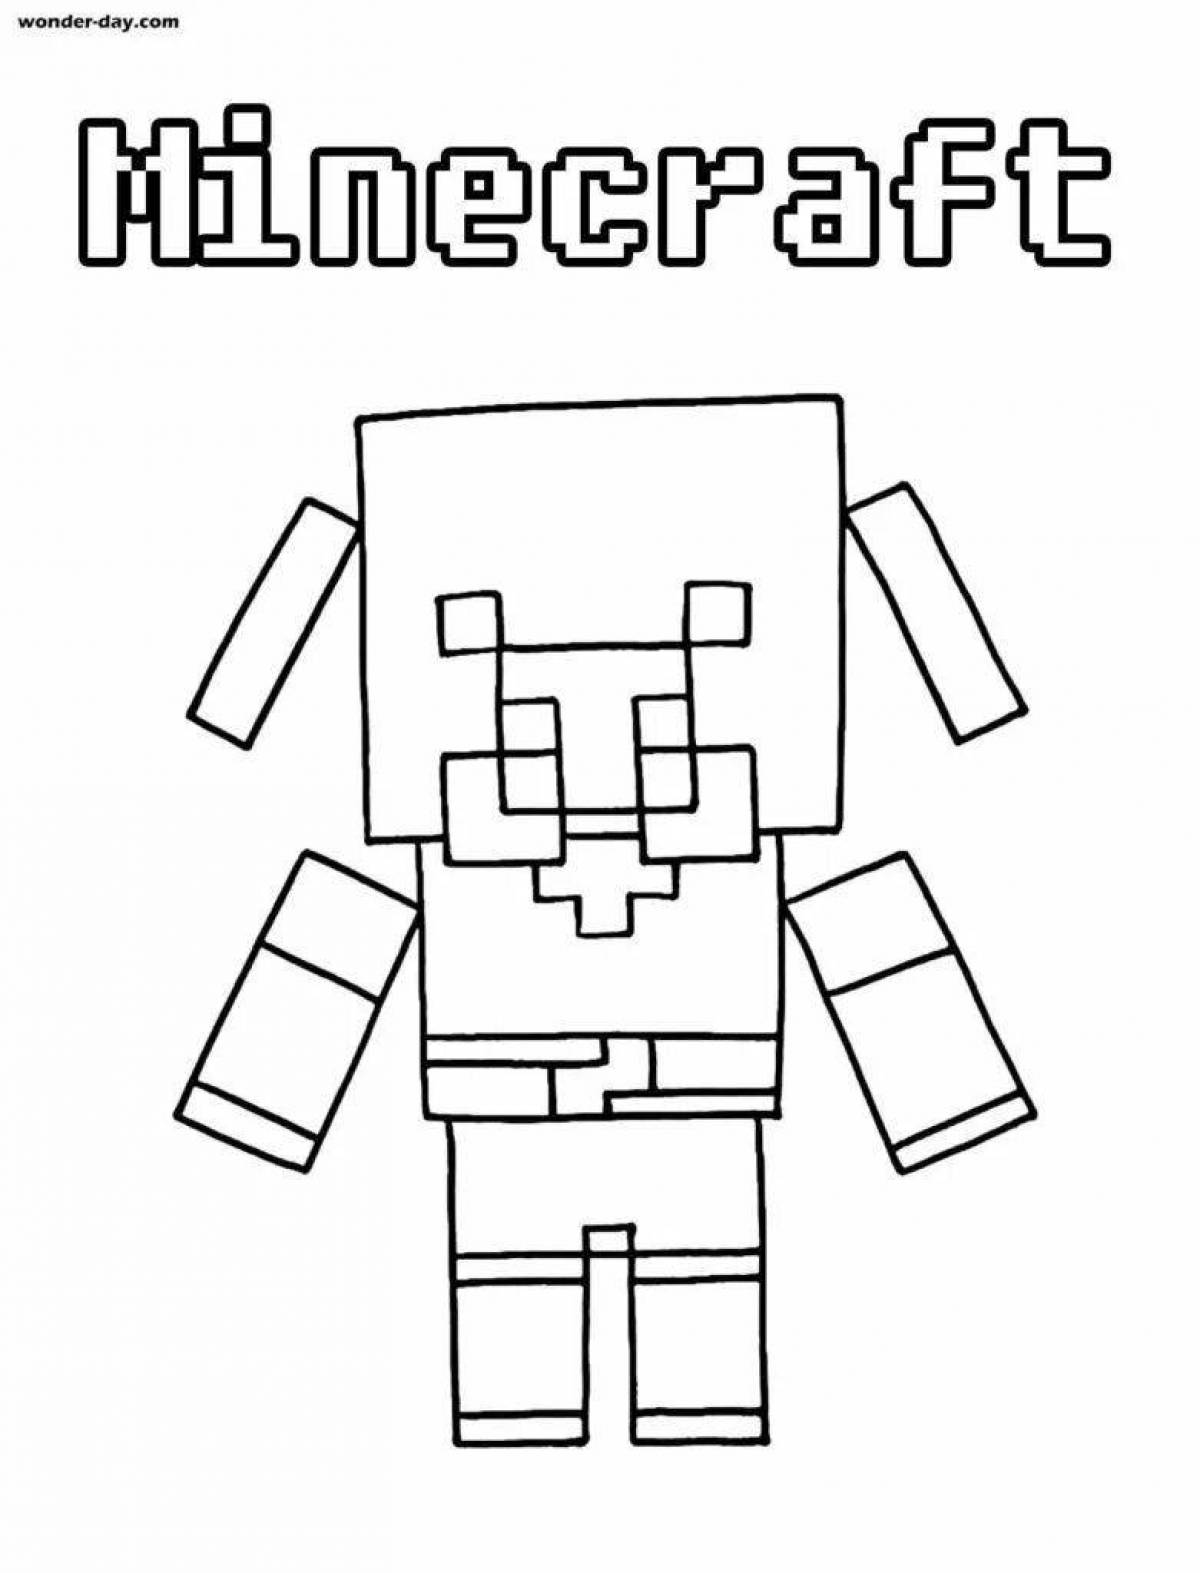 Gorgeous minecraft bookshelf coloring page